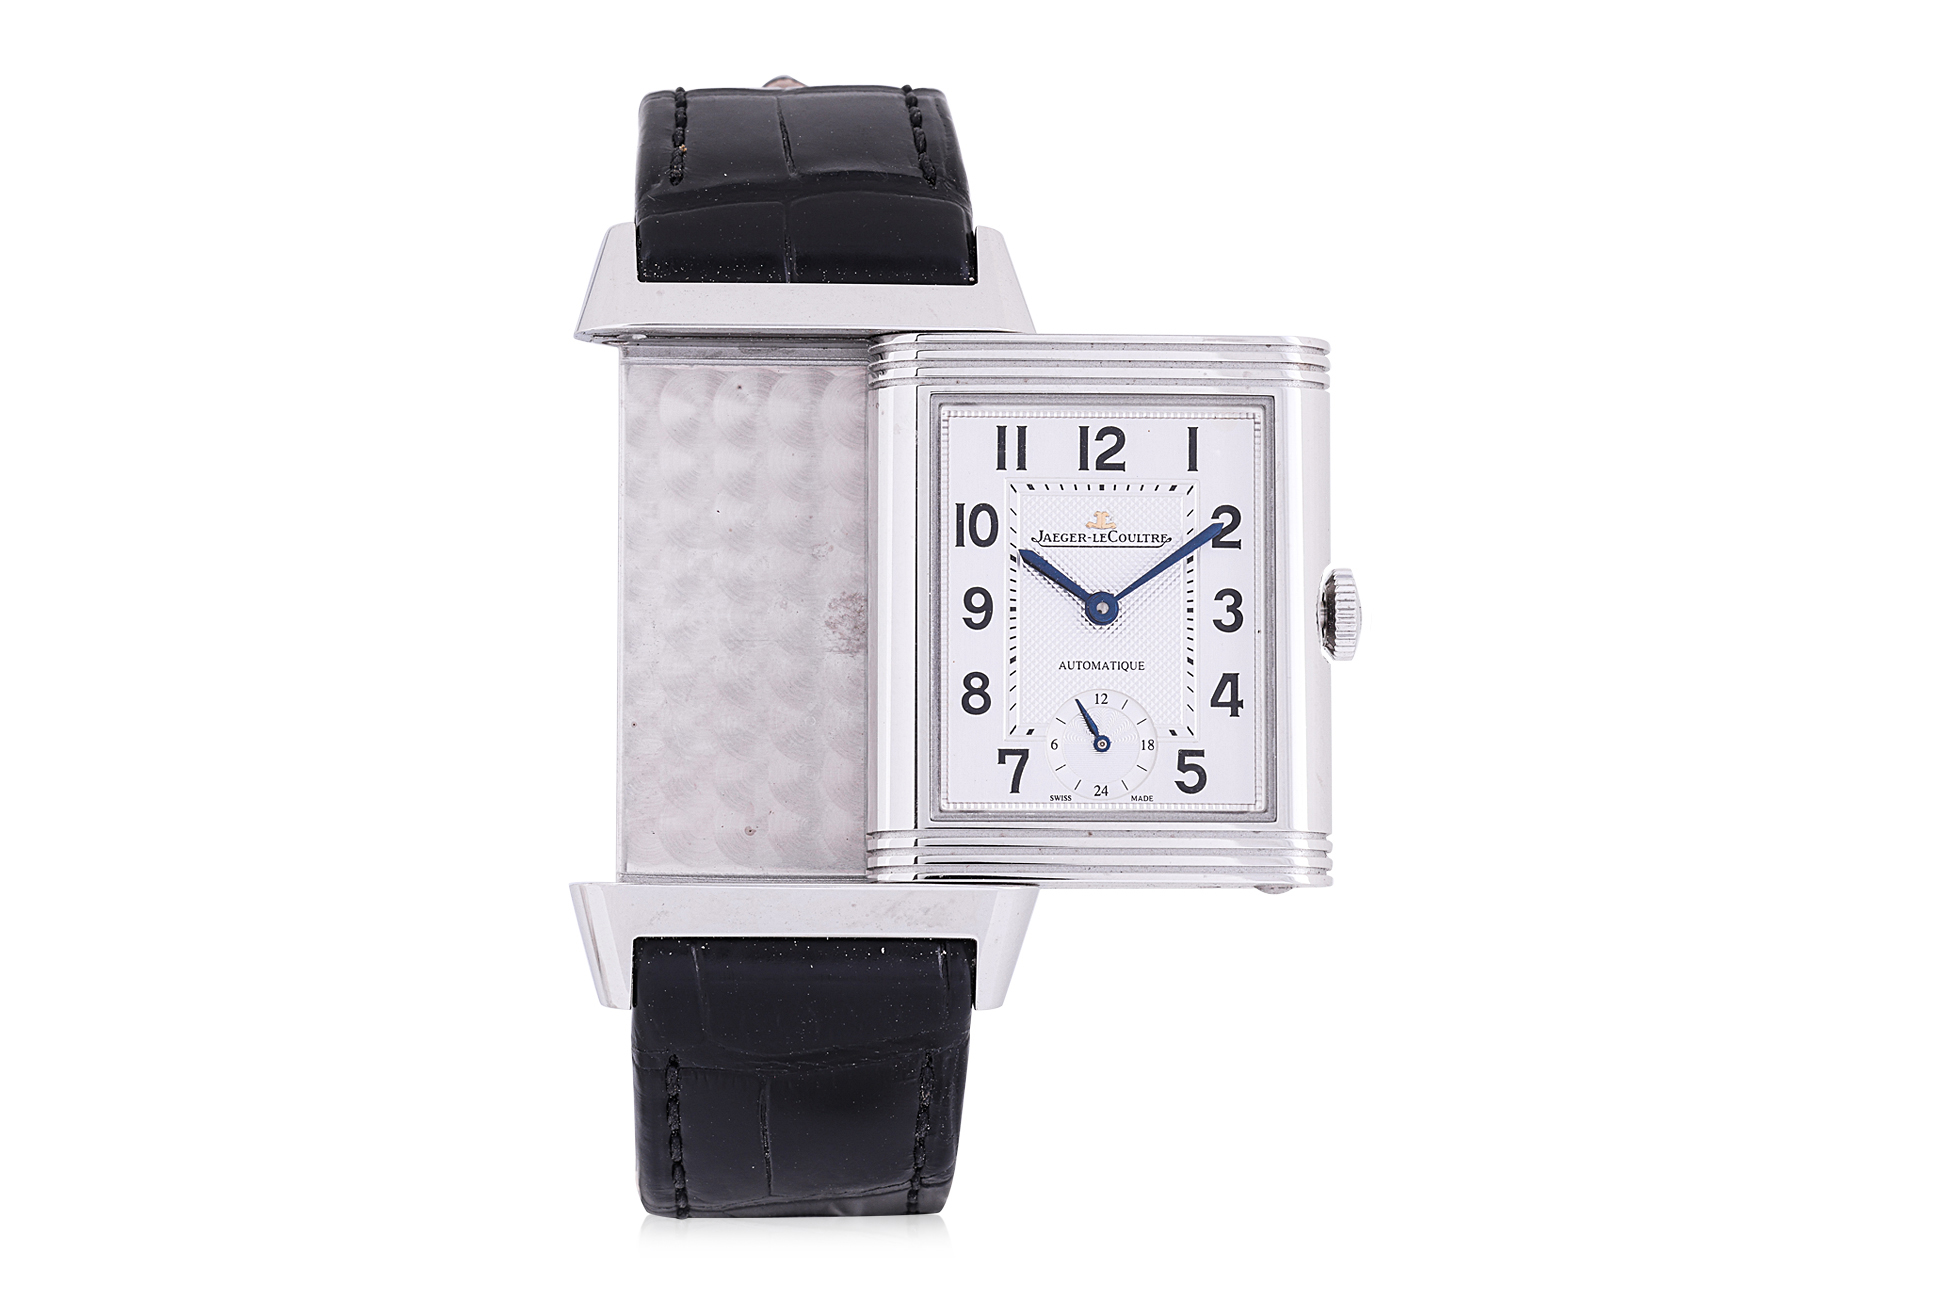 A JAEGER LECOULTRE LIMITED EDITION SG 50 REVERSO WATCH - Image 2 of 8